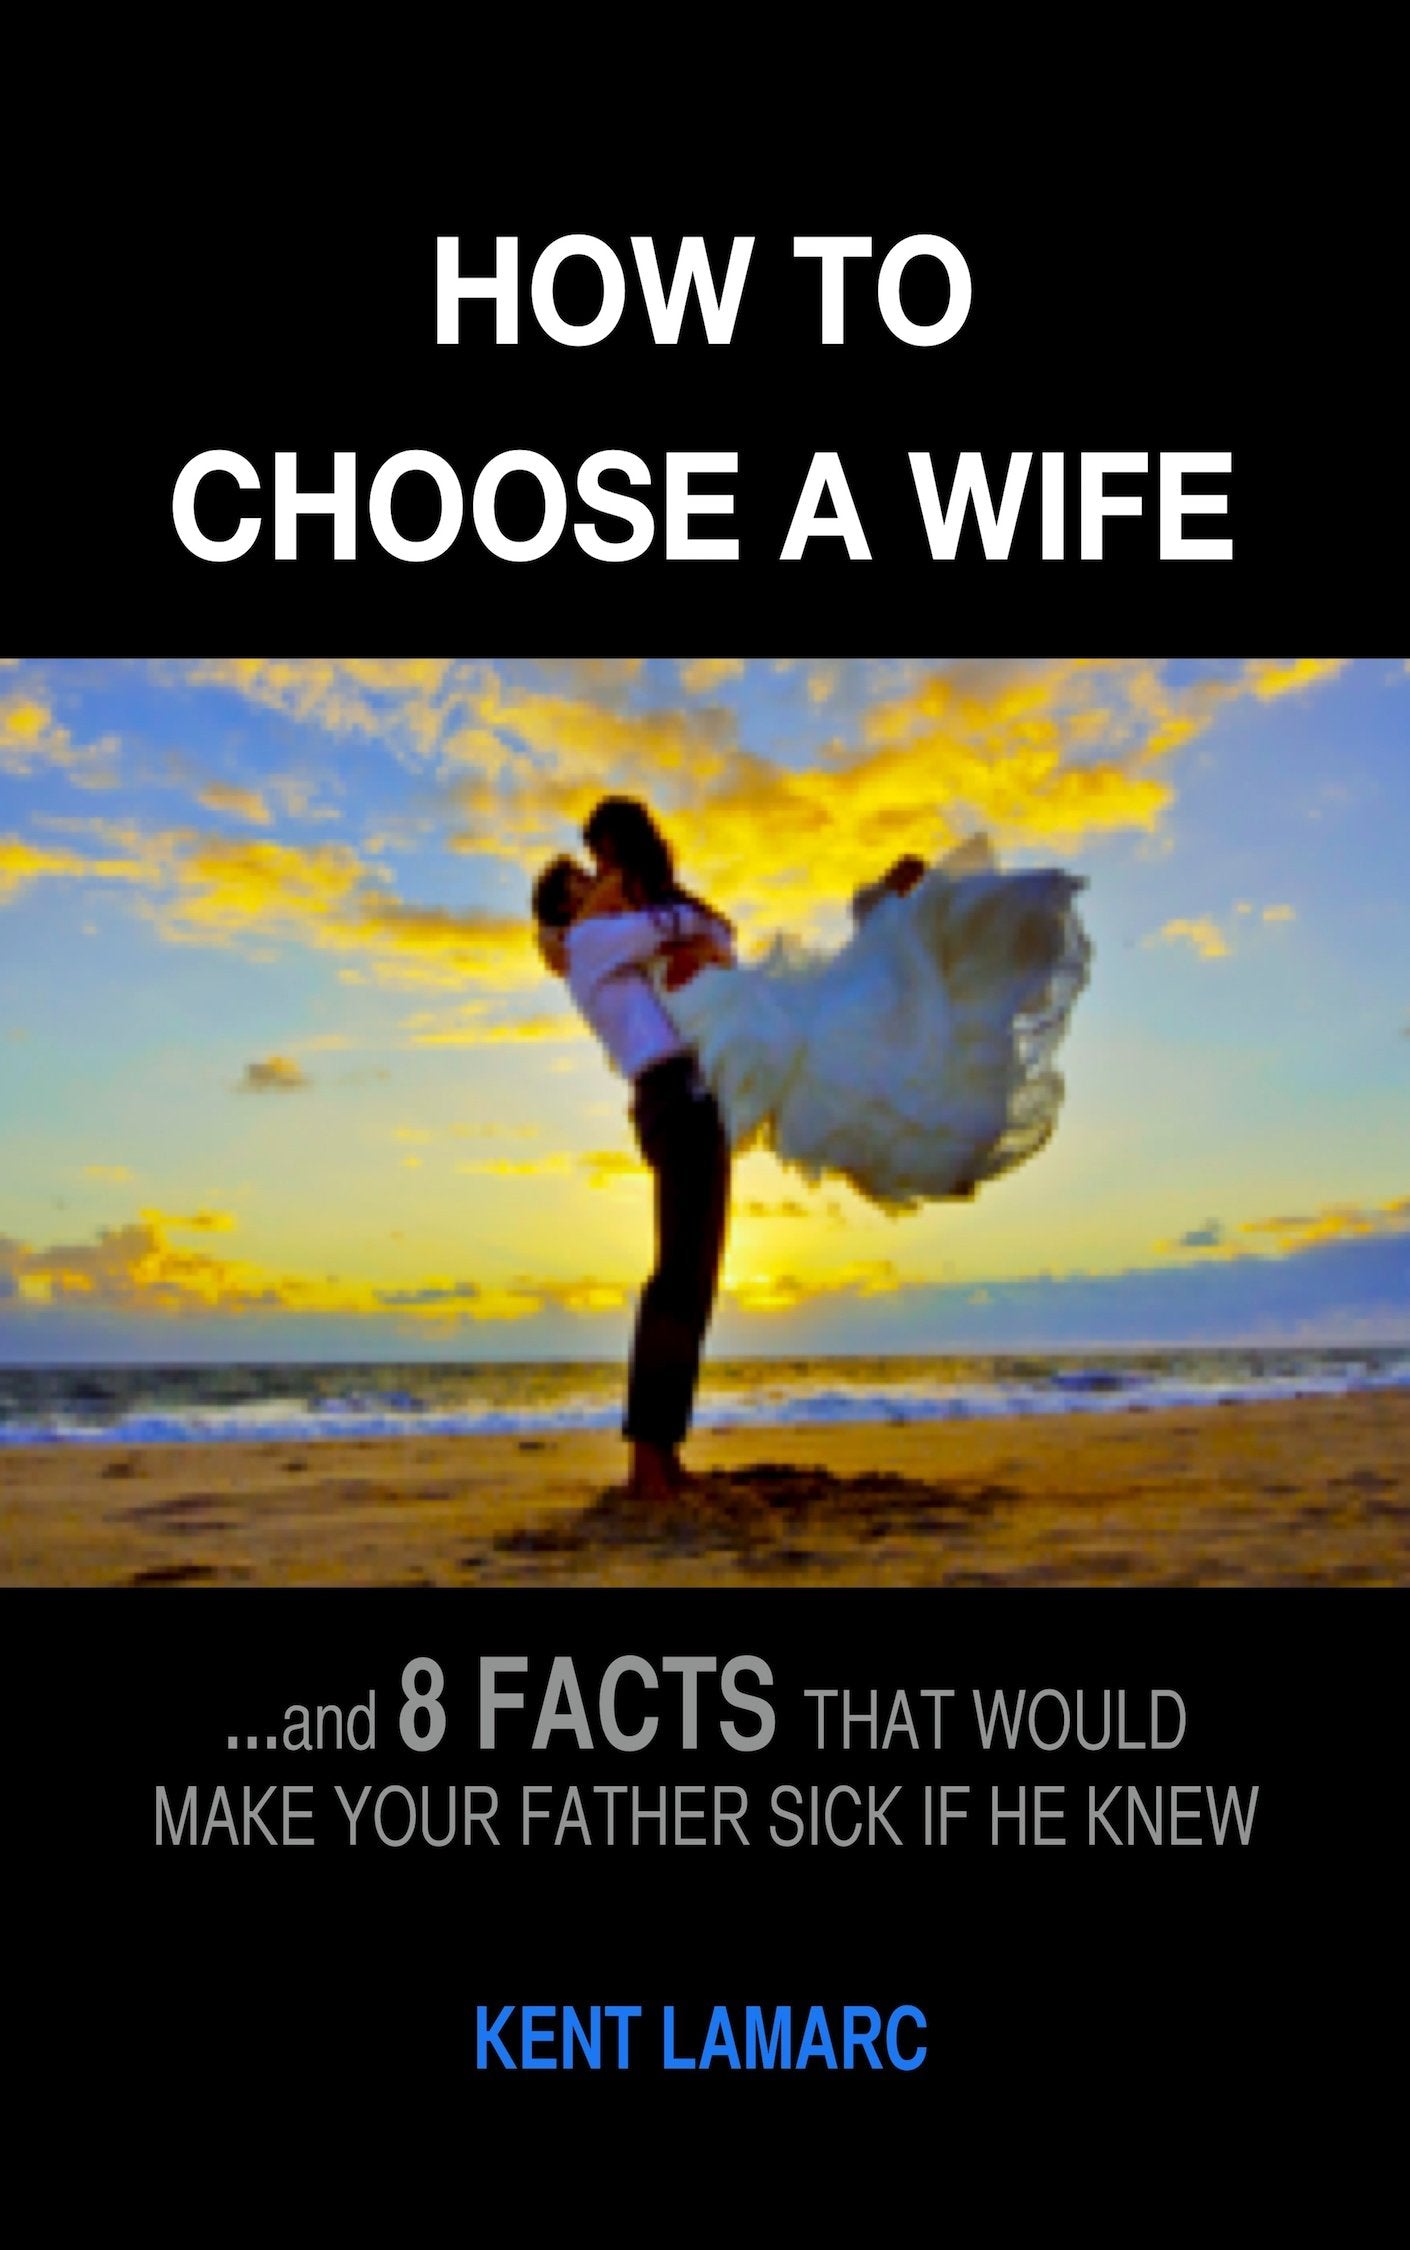 How to Choose a Wife - 22 Lions